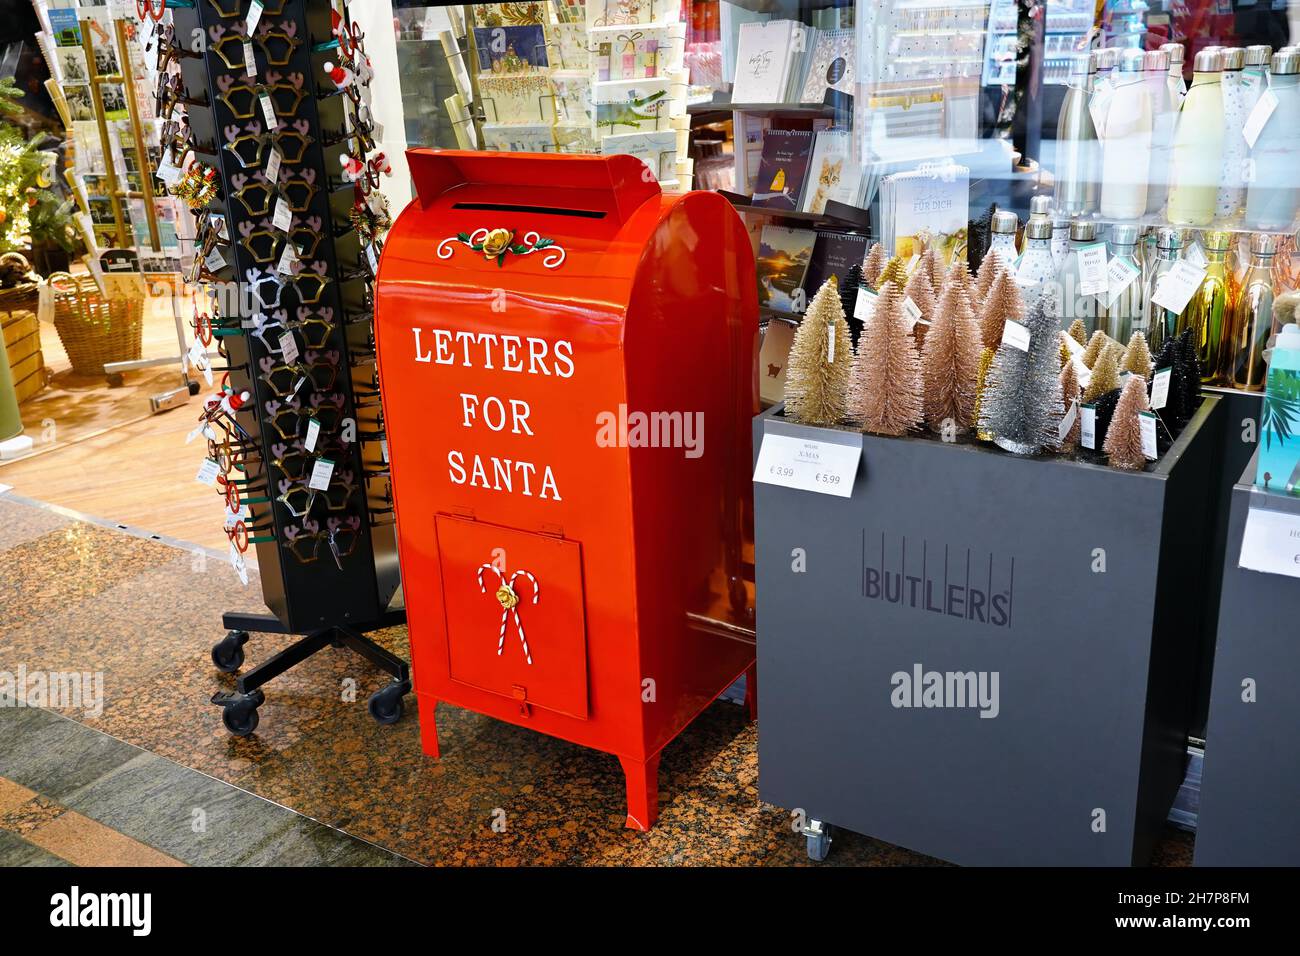 A red 'Letters for Santa' letterbox along with Christmas decoration in front of a Butler's store in Düsseldorf/Germany. Stock Photo